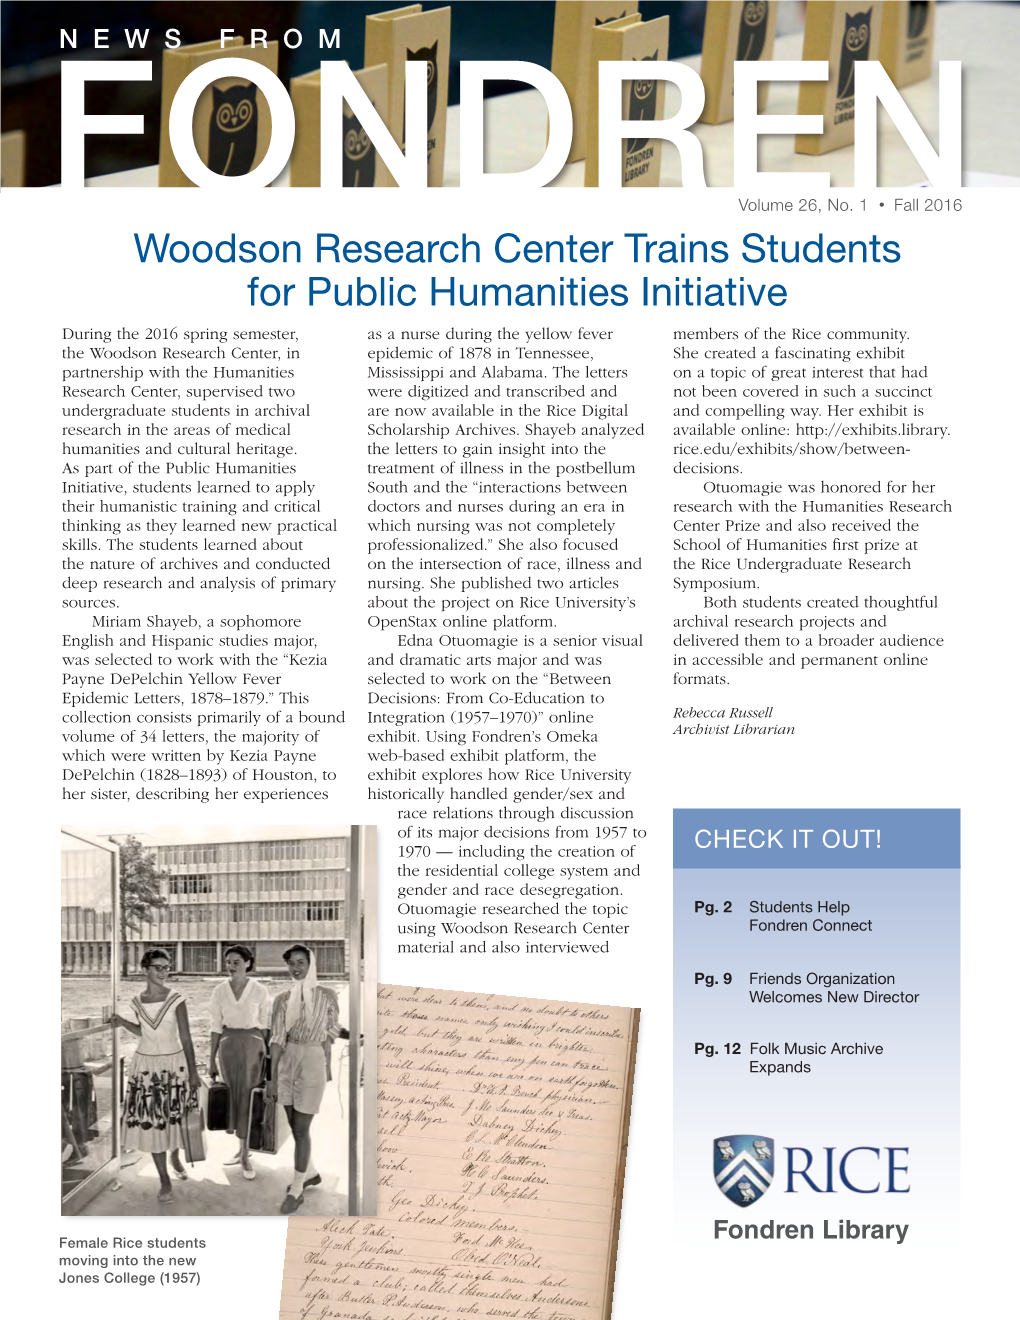 Woodson Research Center Trains Students for Public Humanities Initiative